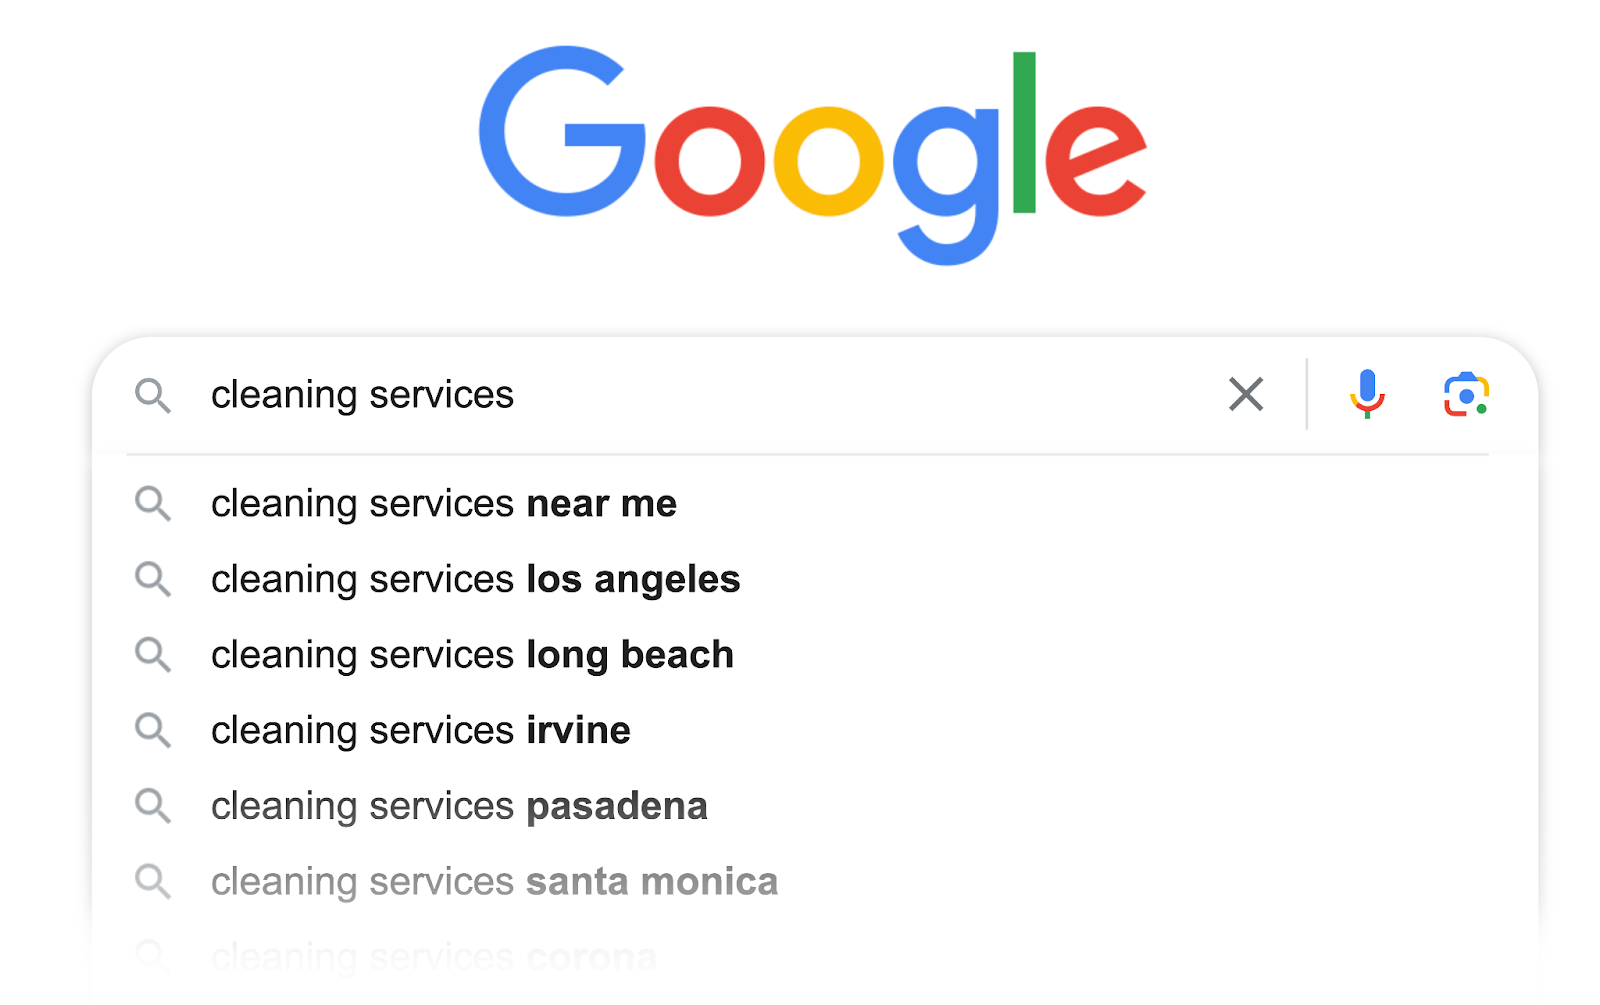 Google Autocomplete suggestions for “cleaning services”